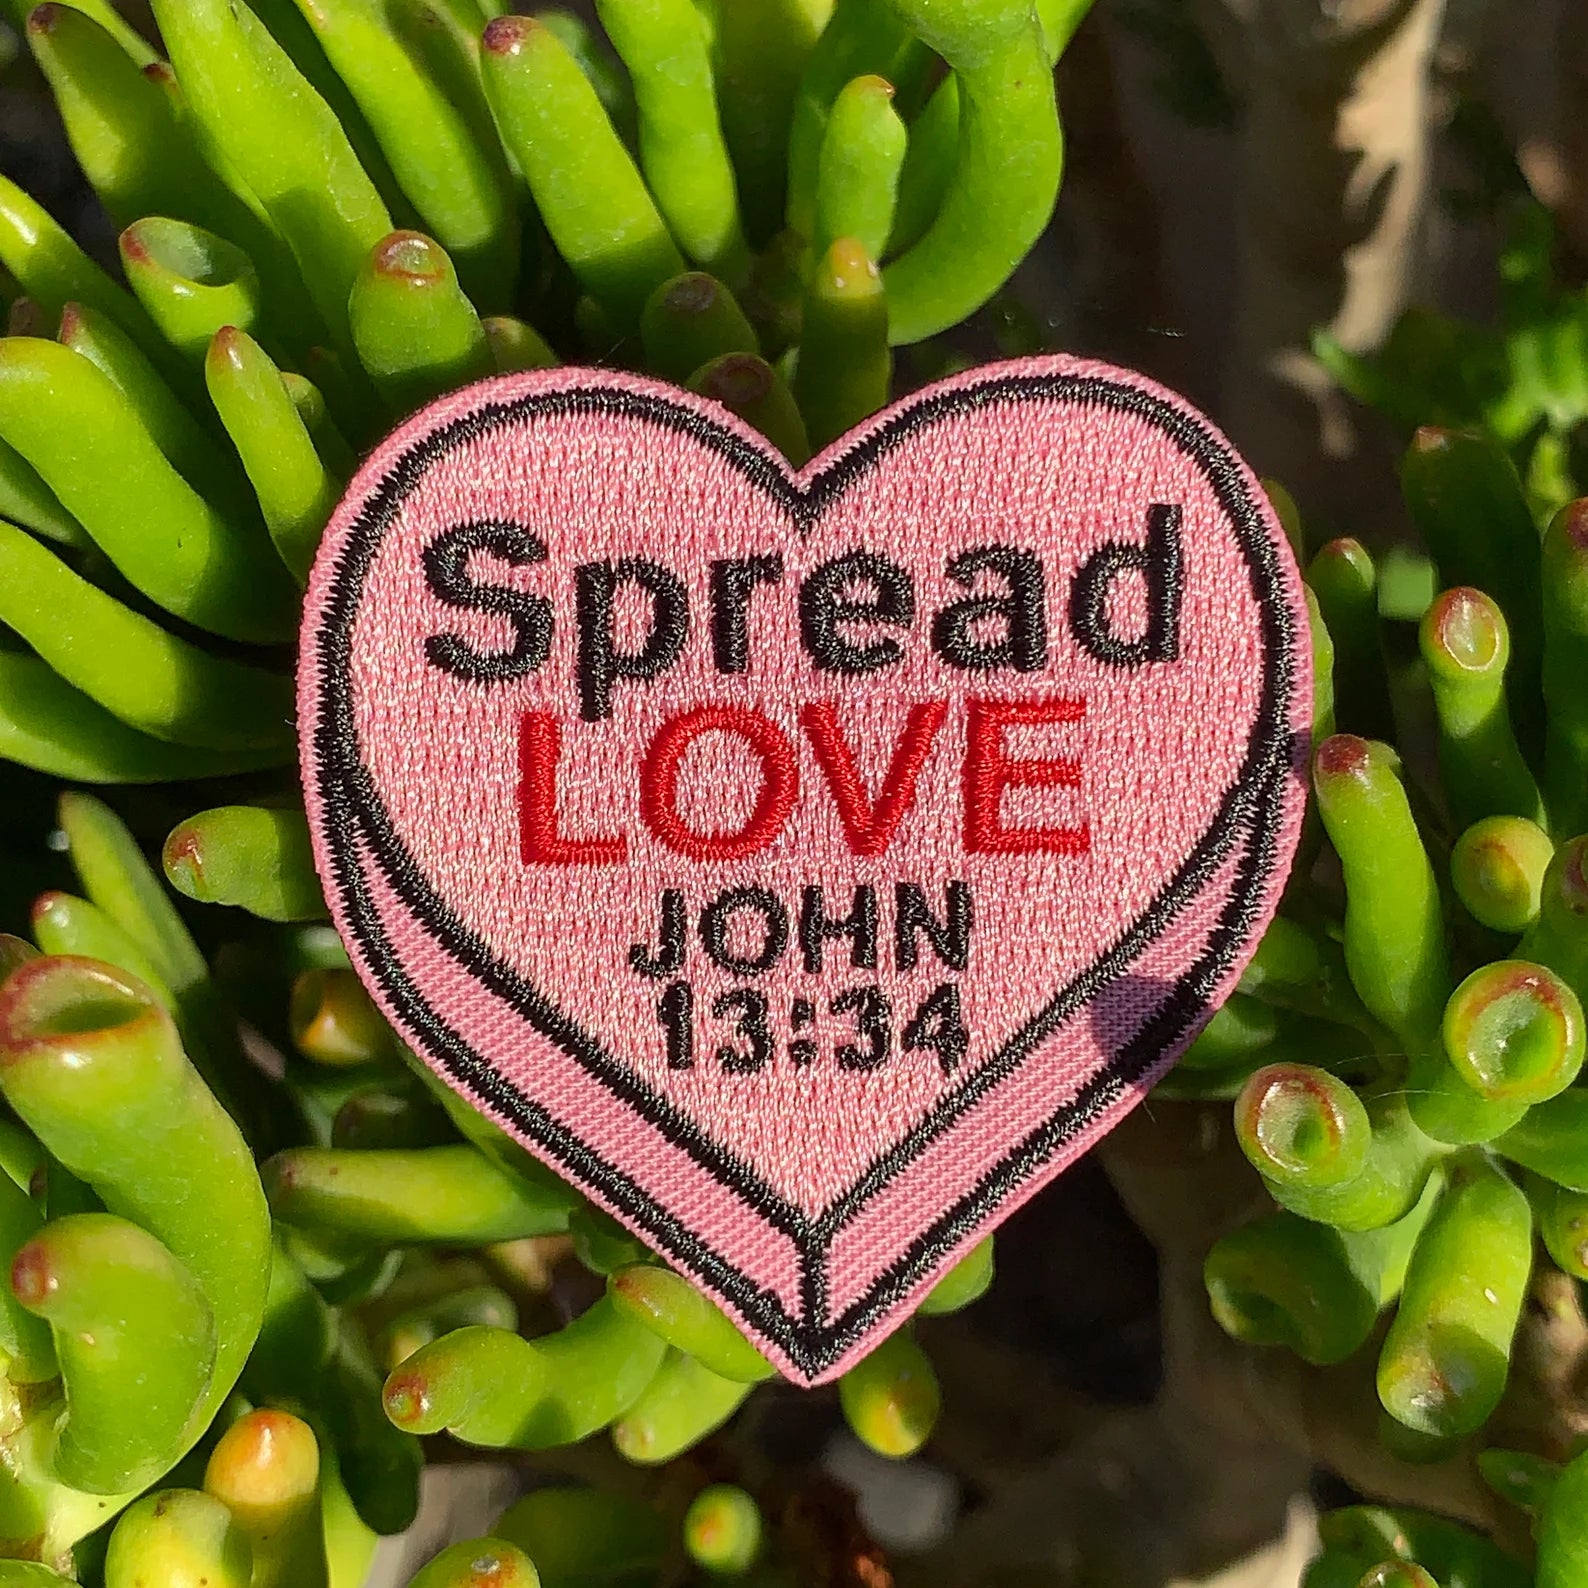 Spread Love Heart Embroidery Iron-on Christian Patch Bible Verse